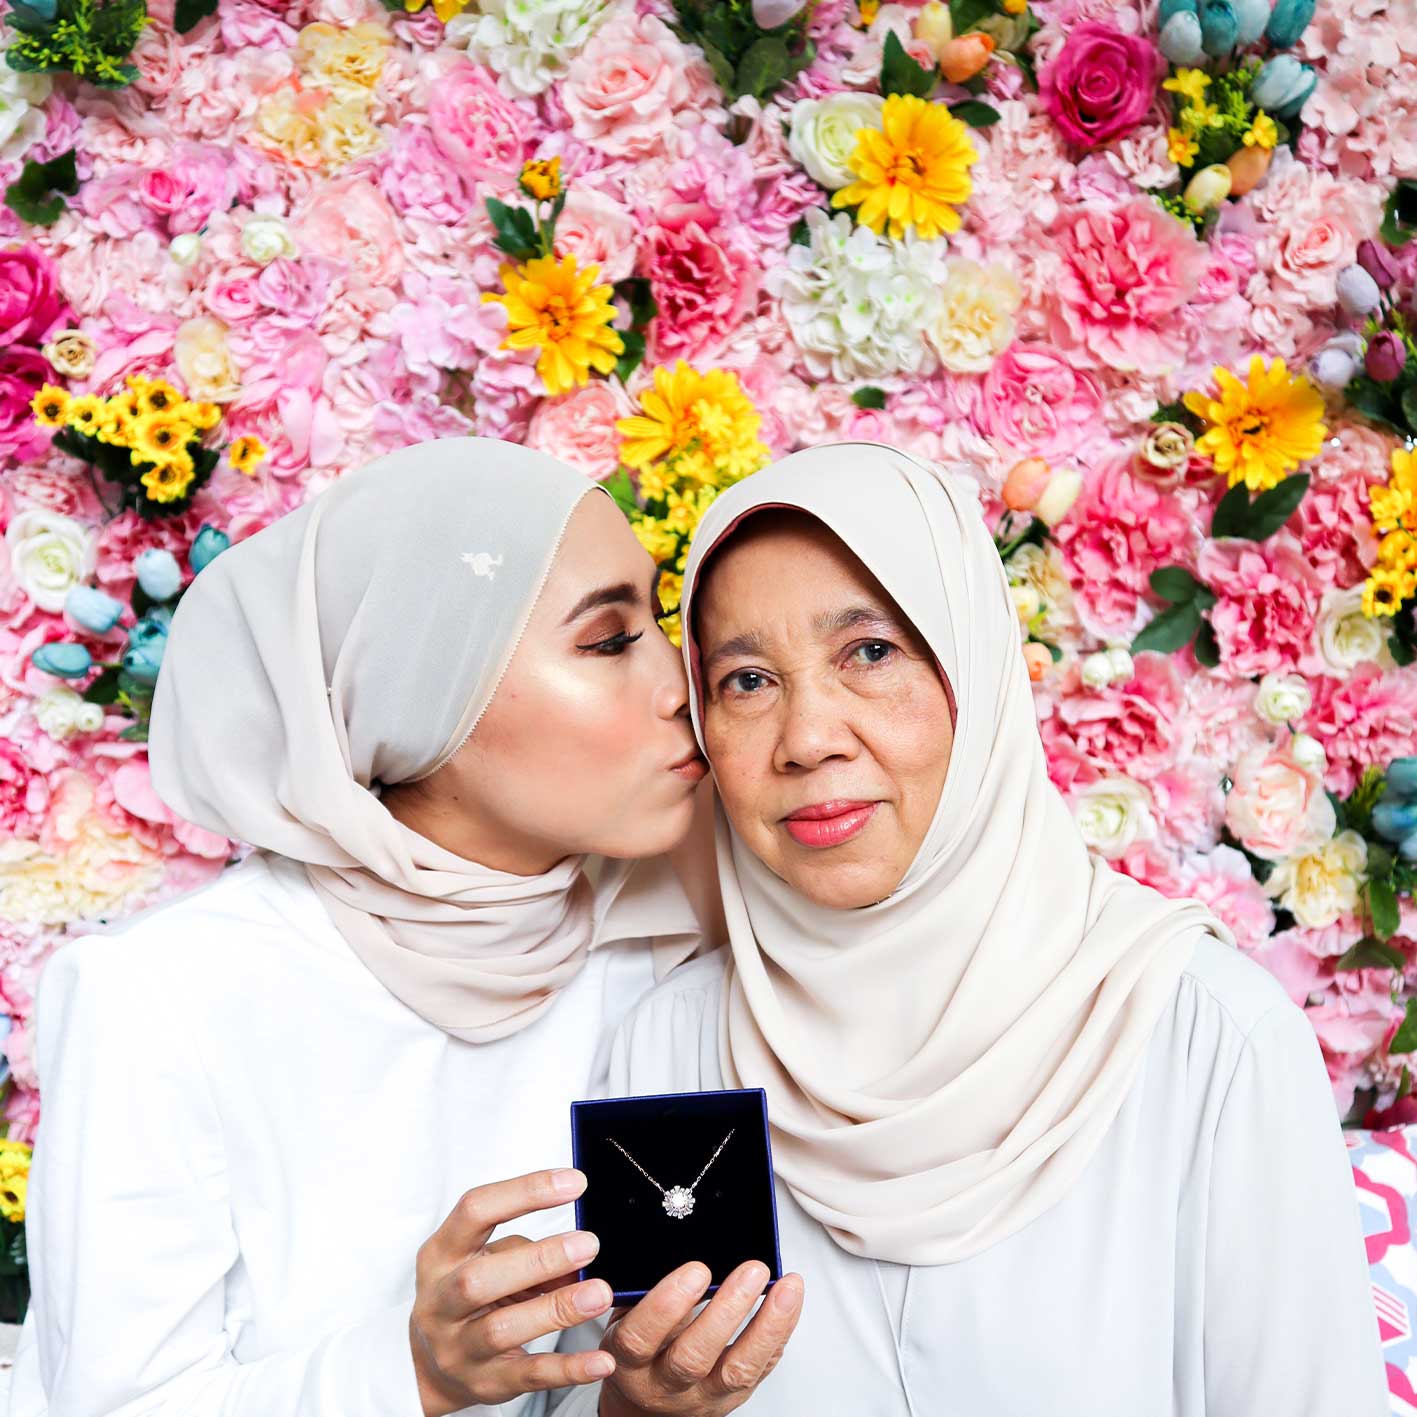 Mother’s Day insights and advice for social media marketers